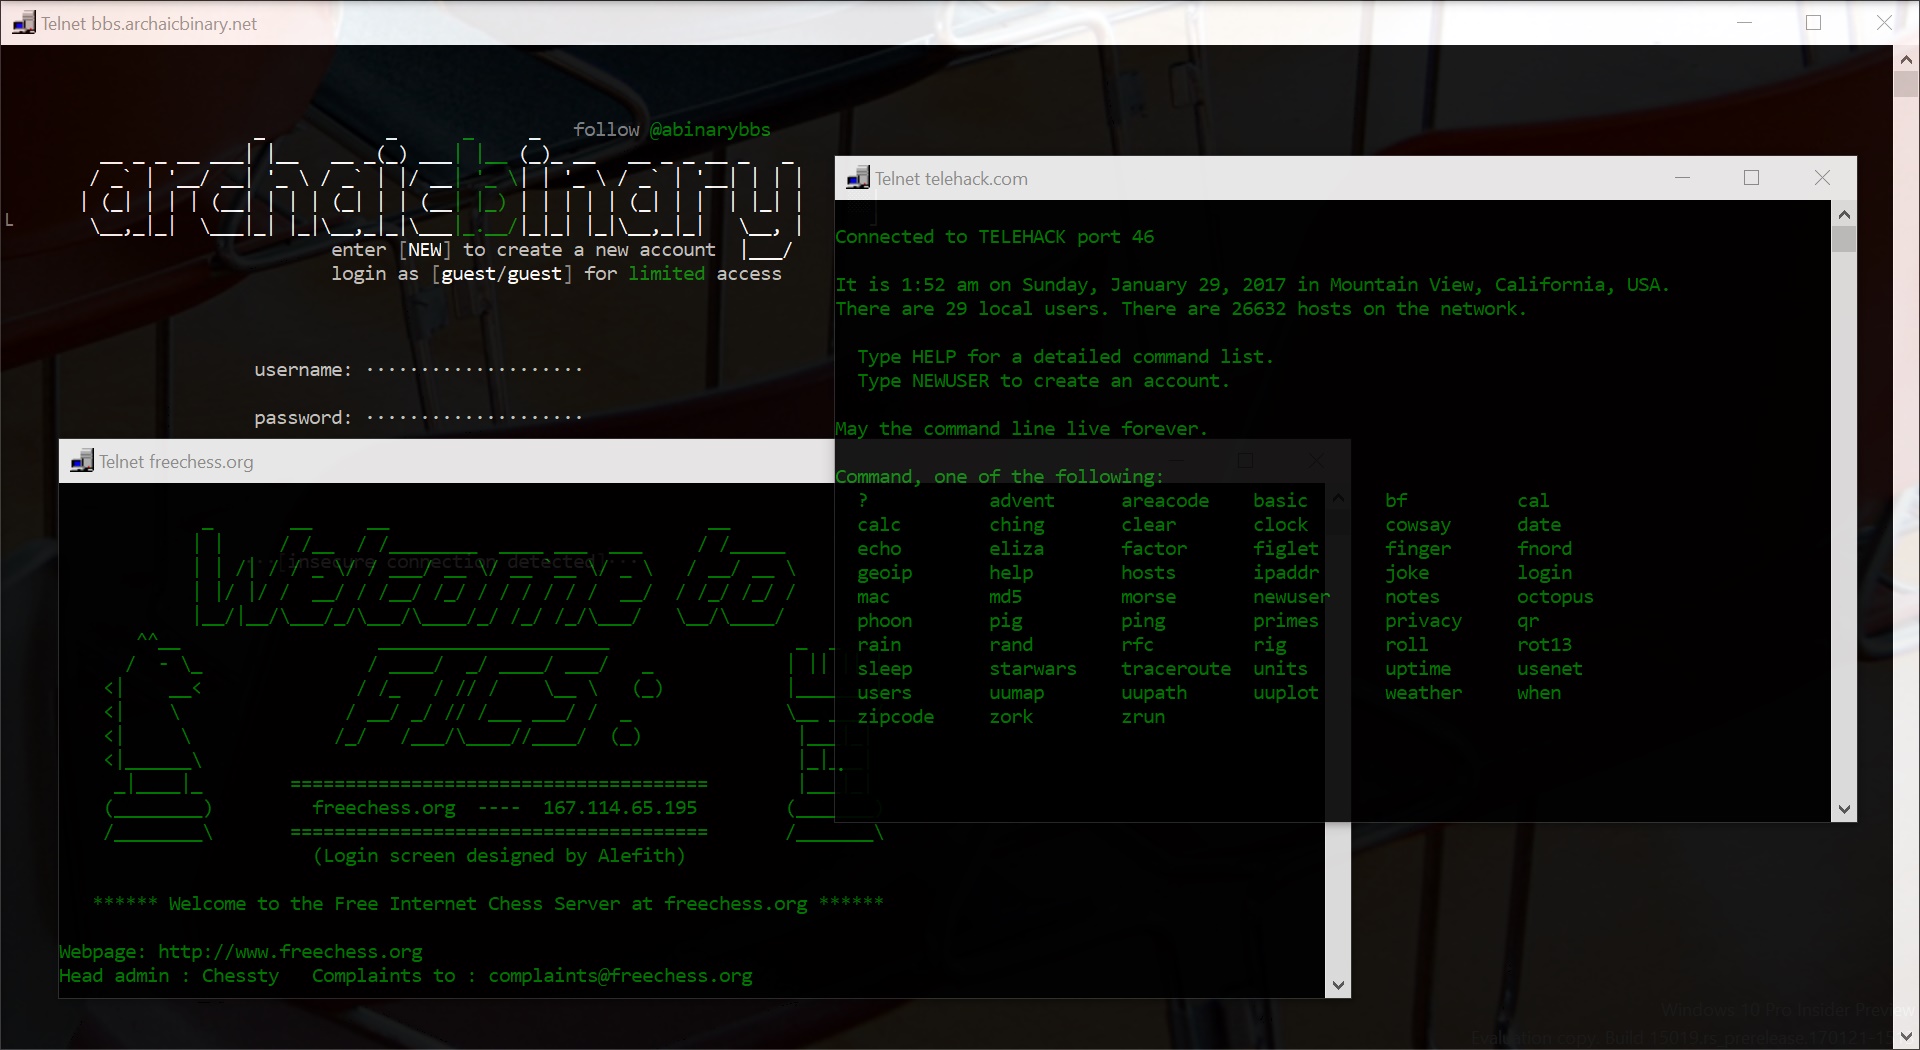 Remember Telnet? Here is what you can still do with it on your Windows 10 PC